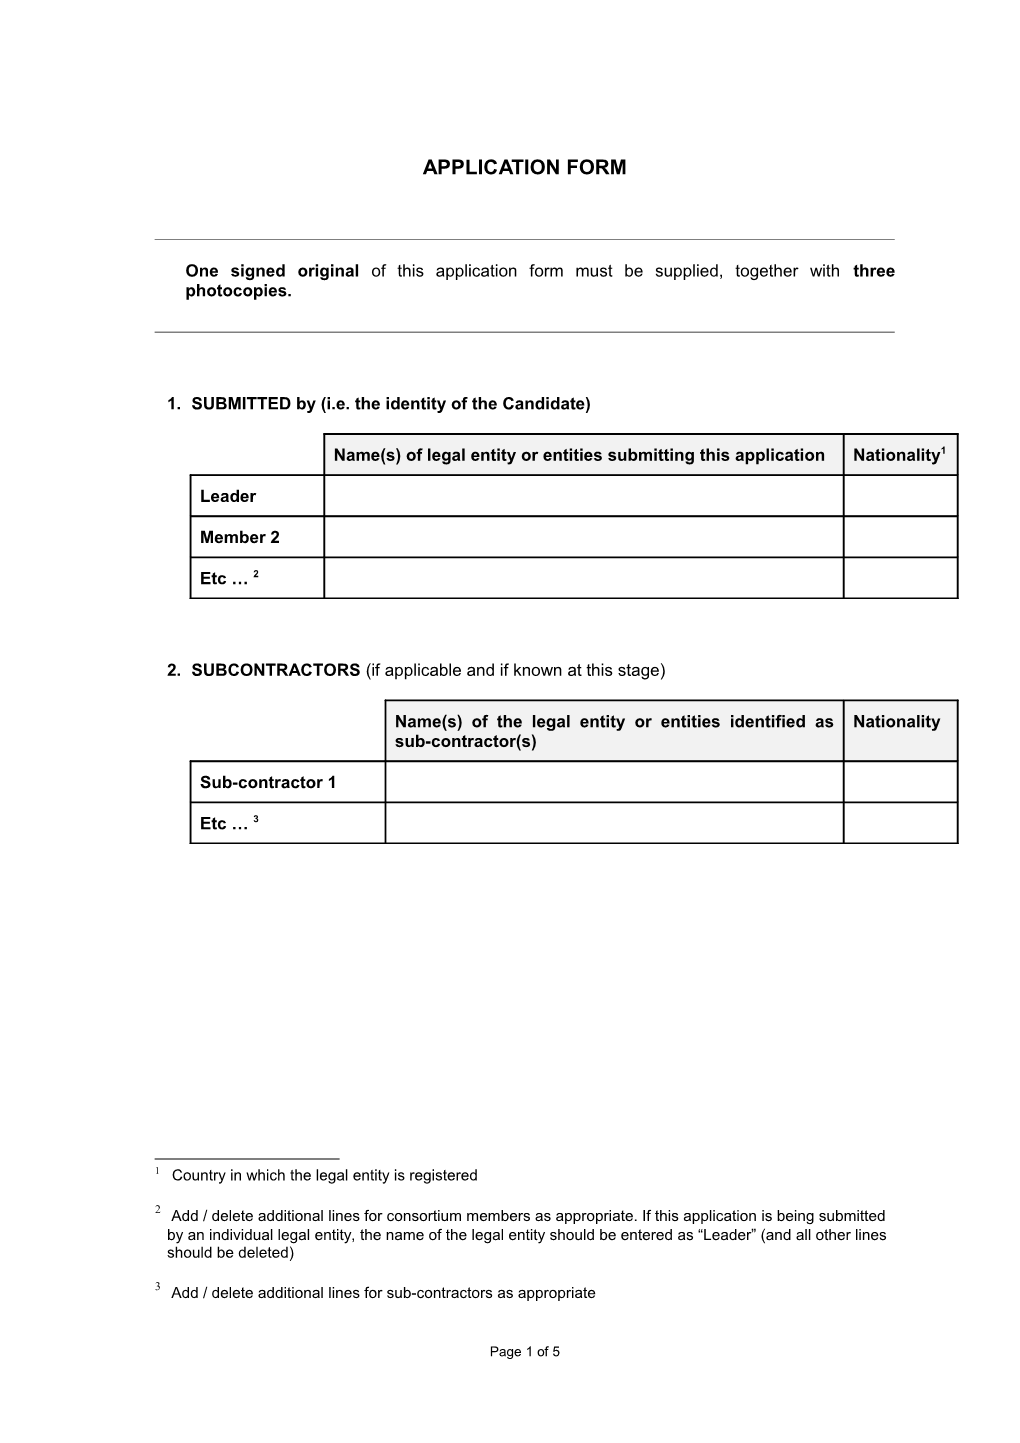 One Signed Original of This Application Form Must Be Supplied, Together with Three Photocopies